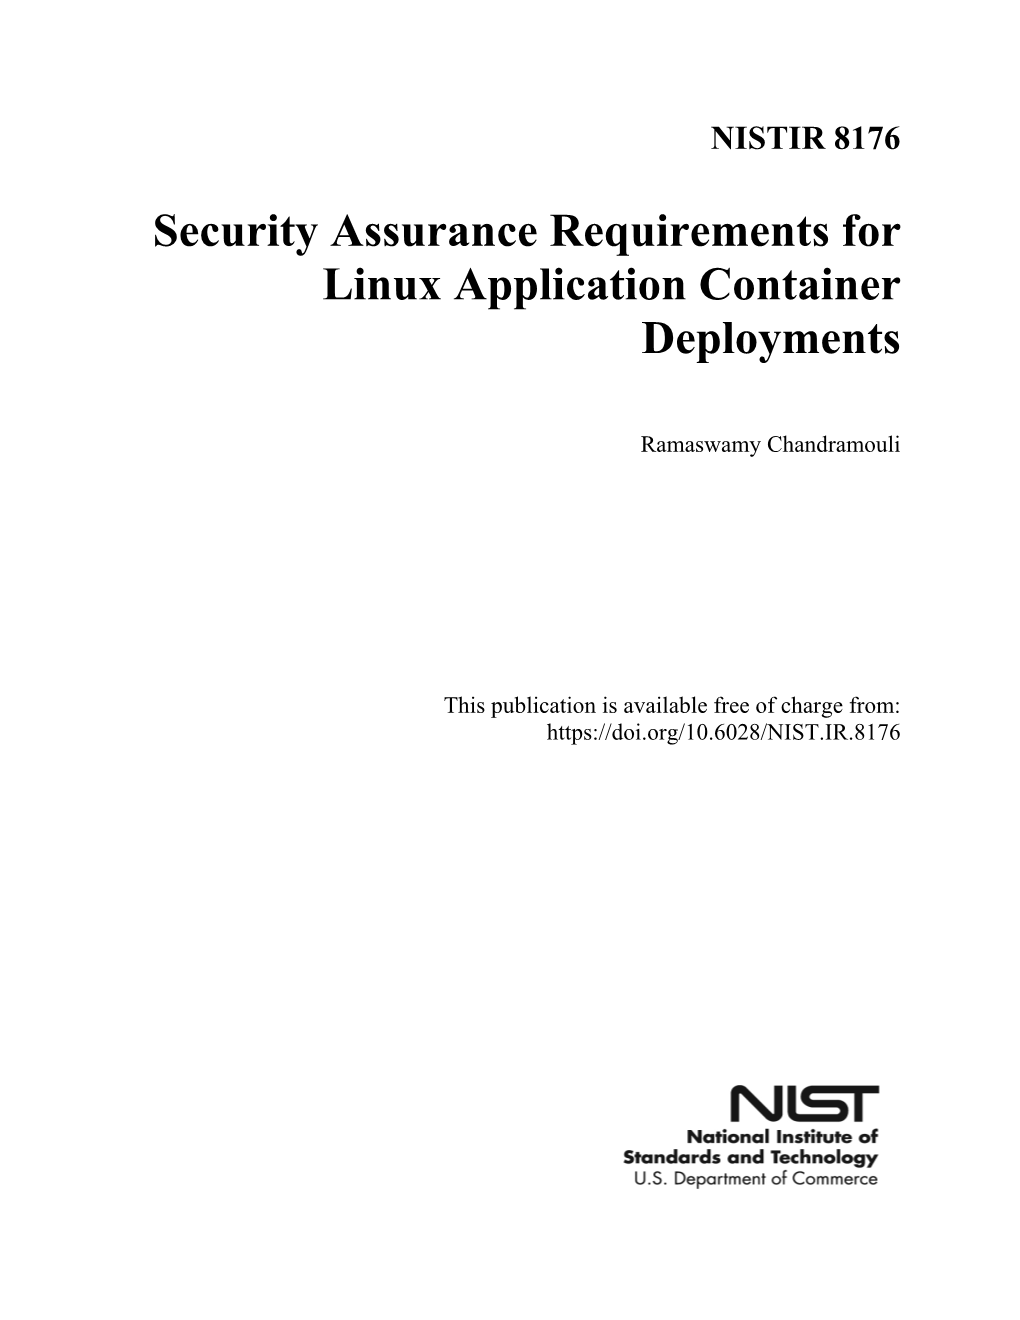 Security Assurance Requirements for Linux Application Container Deployments